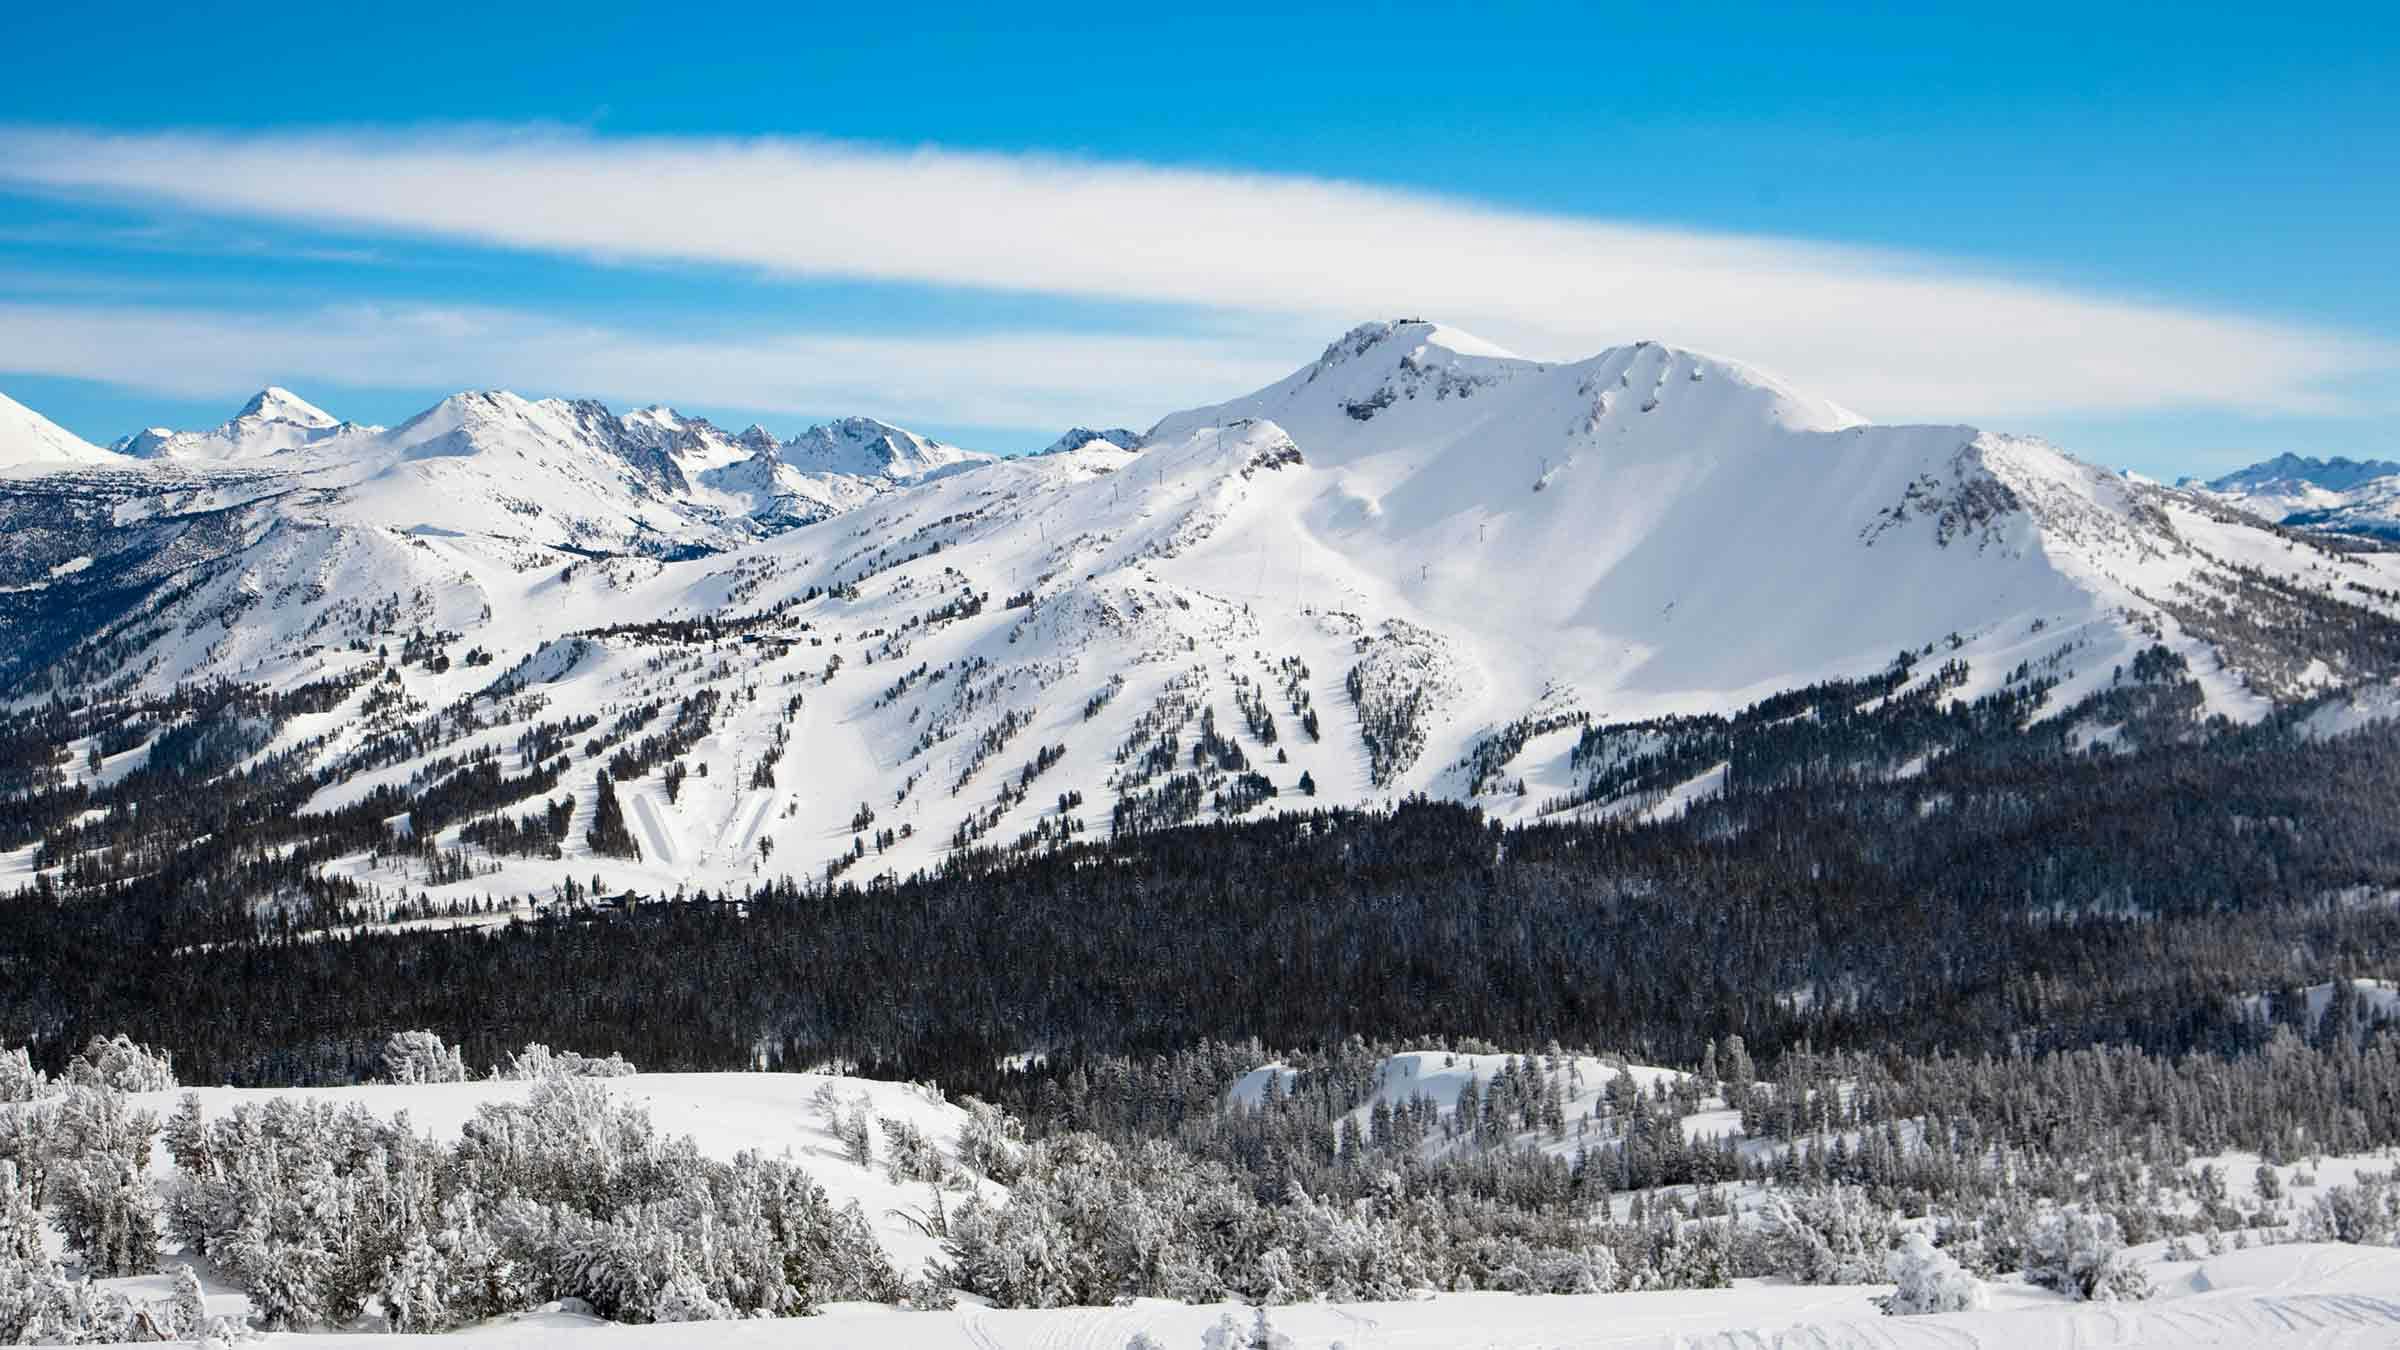 Scenic winter image of Mammoth Mountain covered in snow.